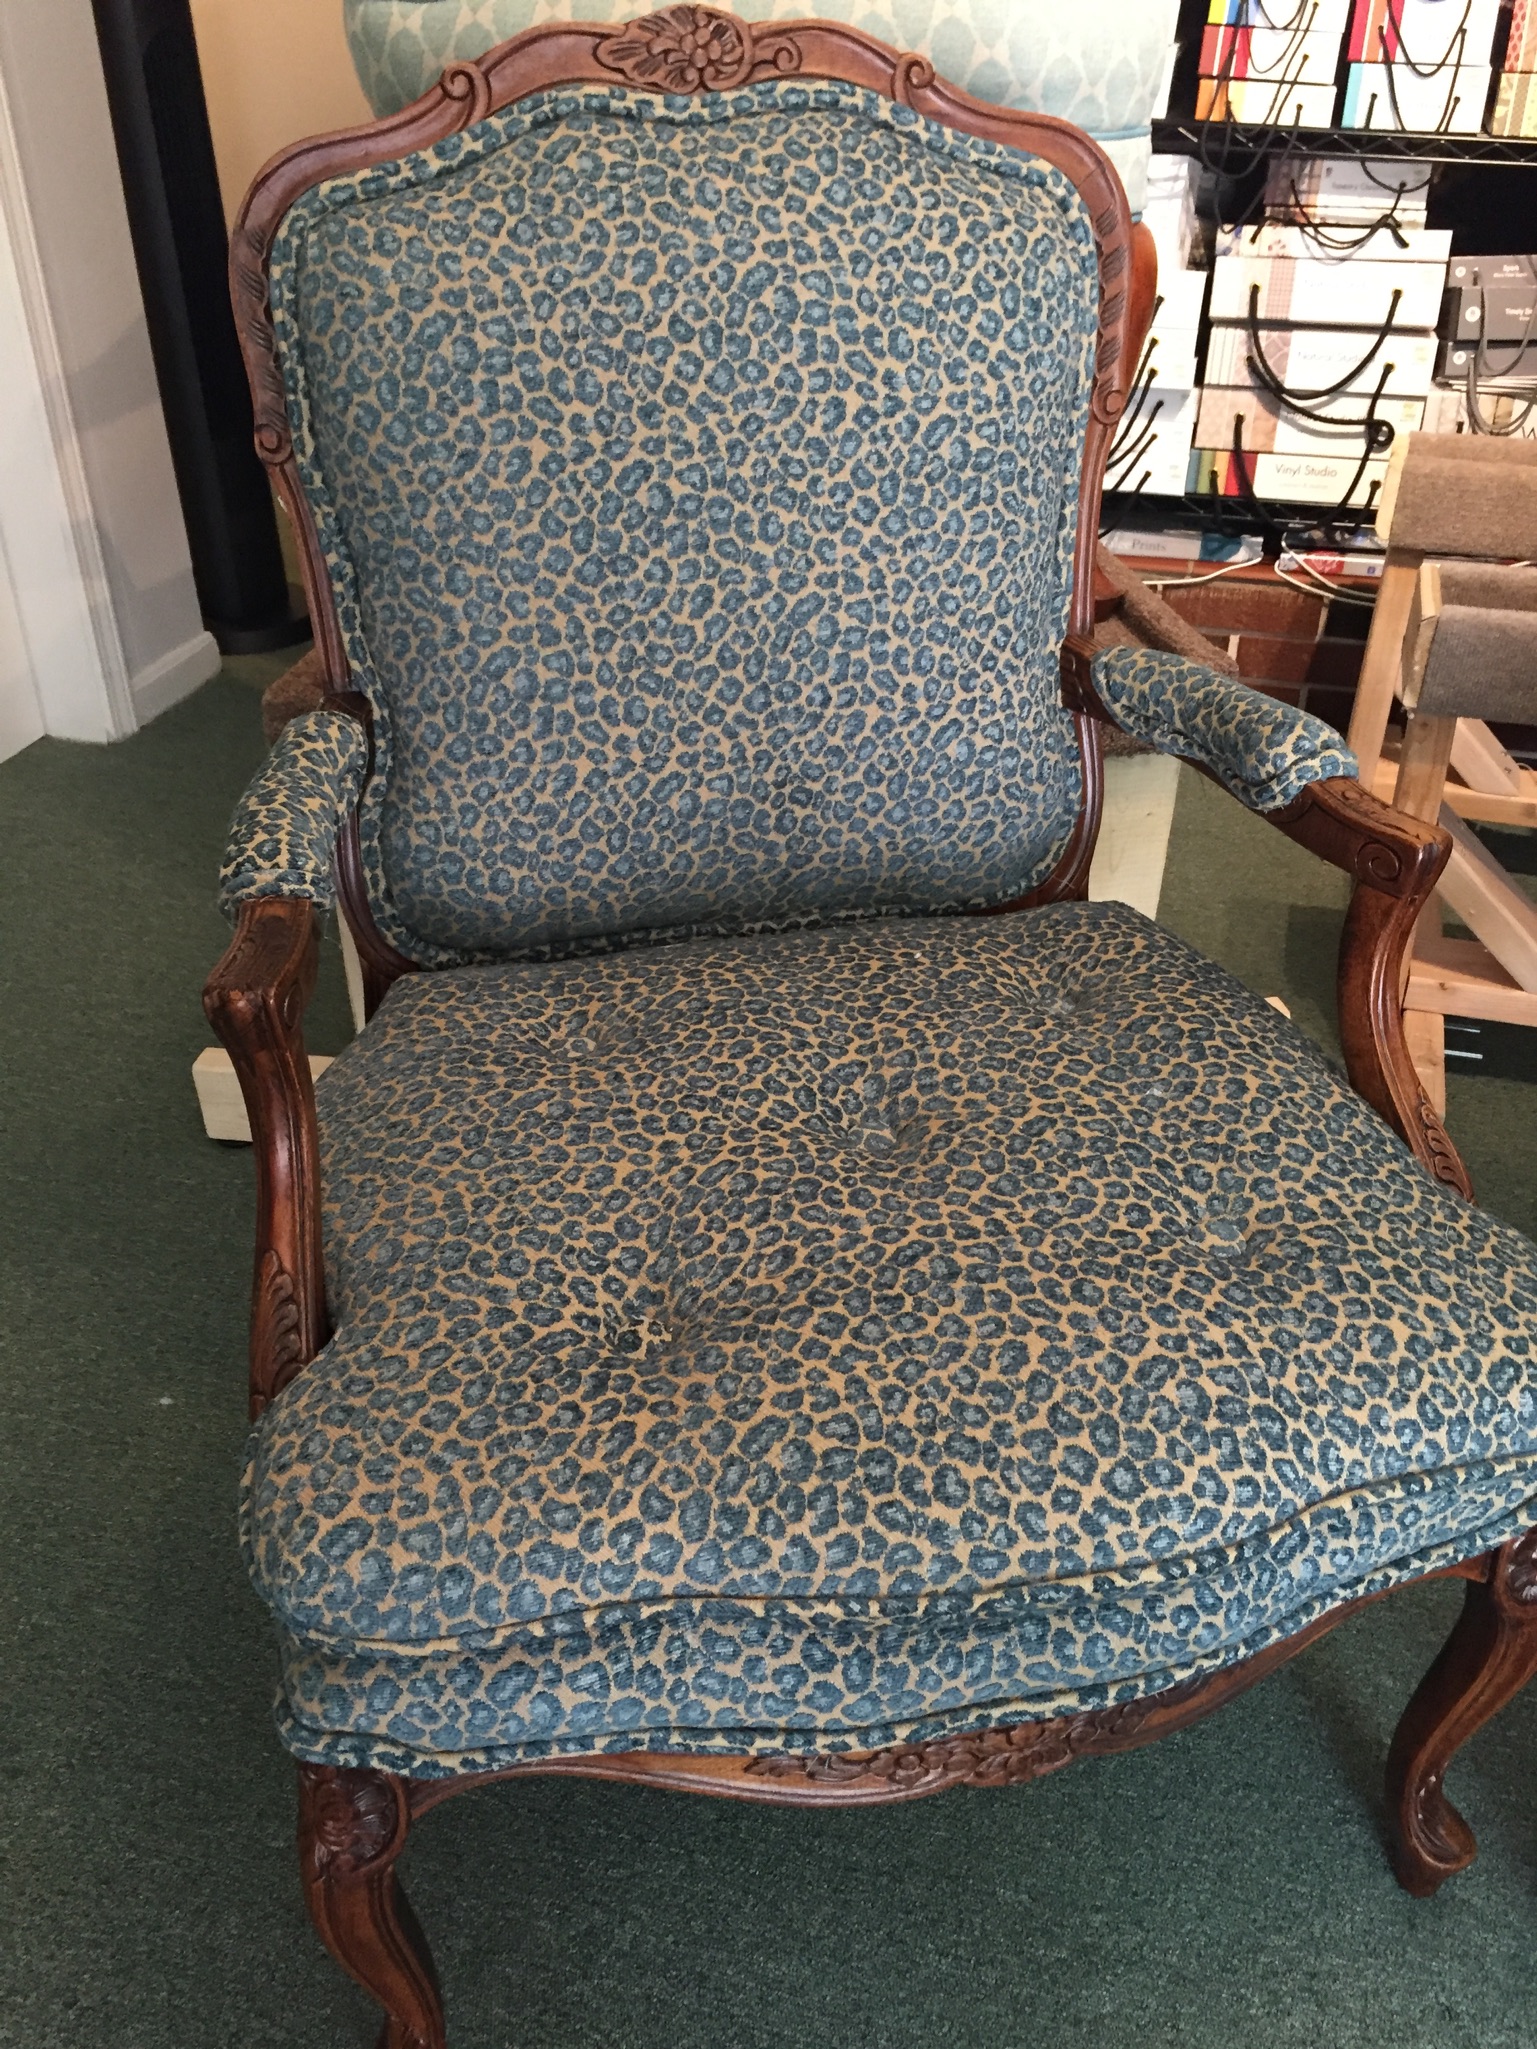 Kims upholstery workshop kips finished chair